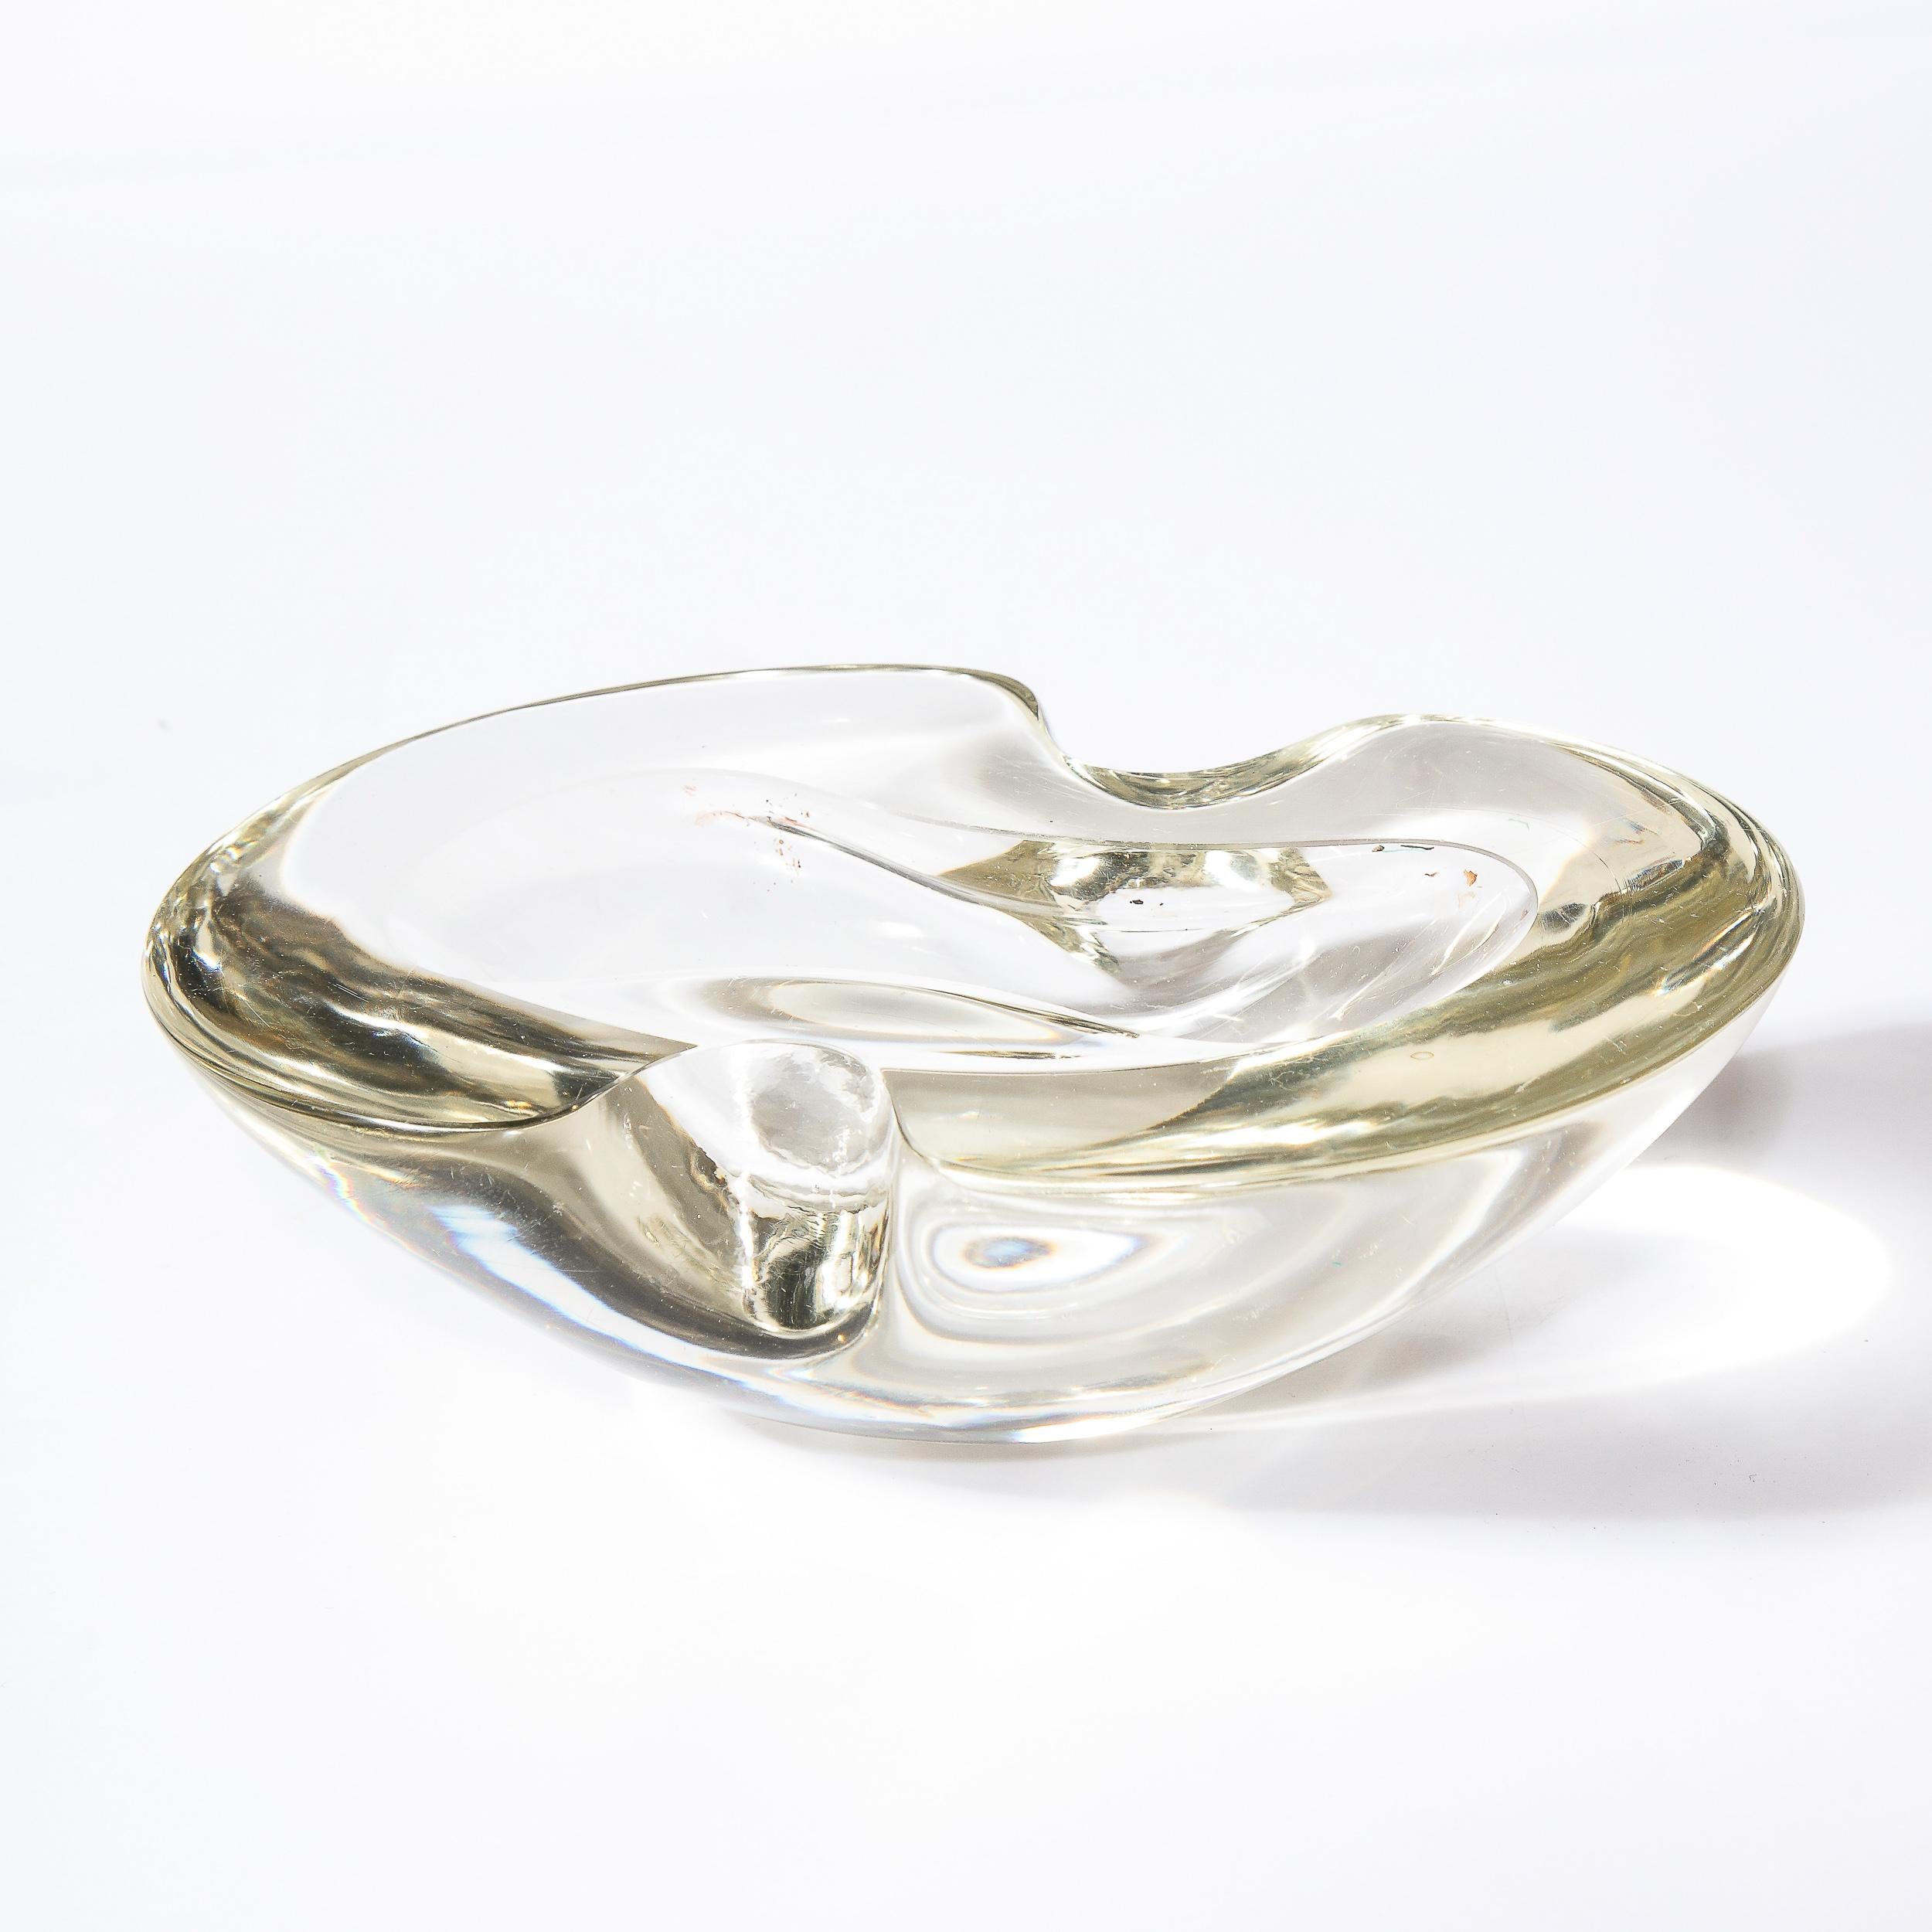 This stunning Mid-Century Modern bowl was realized in Murano, Italy- the island off the coast of Venice renowned for centuries for its superlative glass production. It features an ovoid form with scalloped sides in beautiful handblown Murano glass.